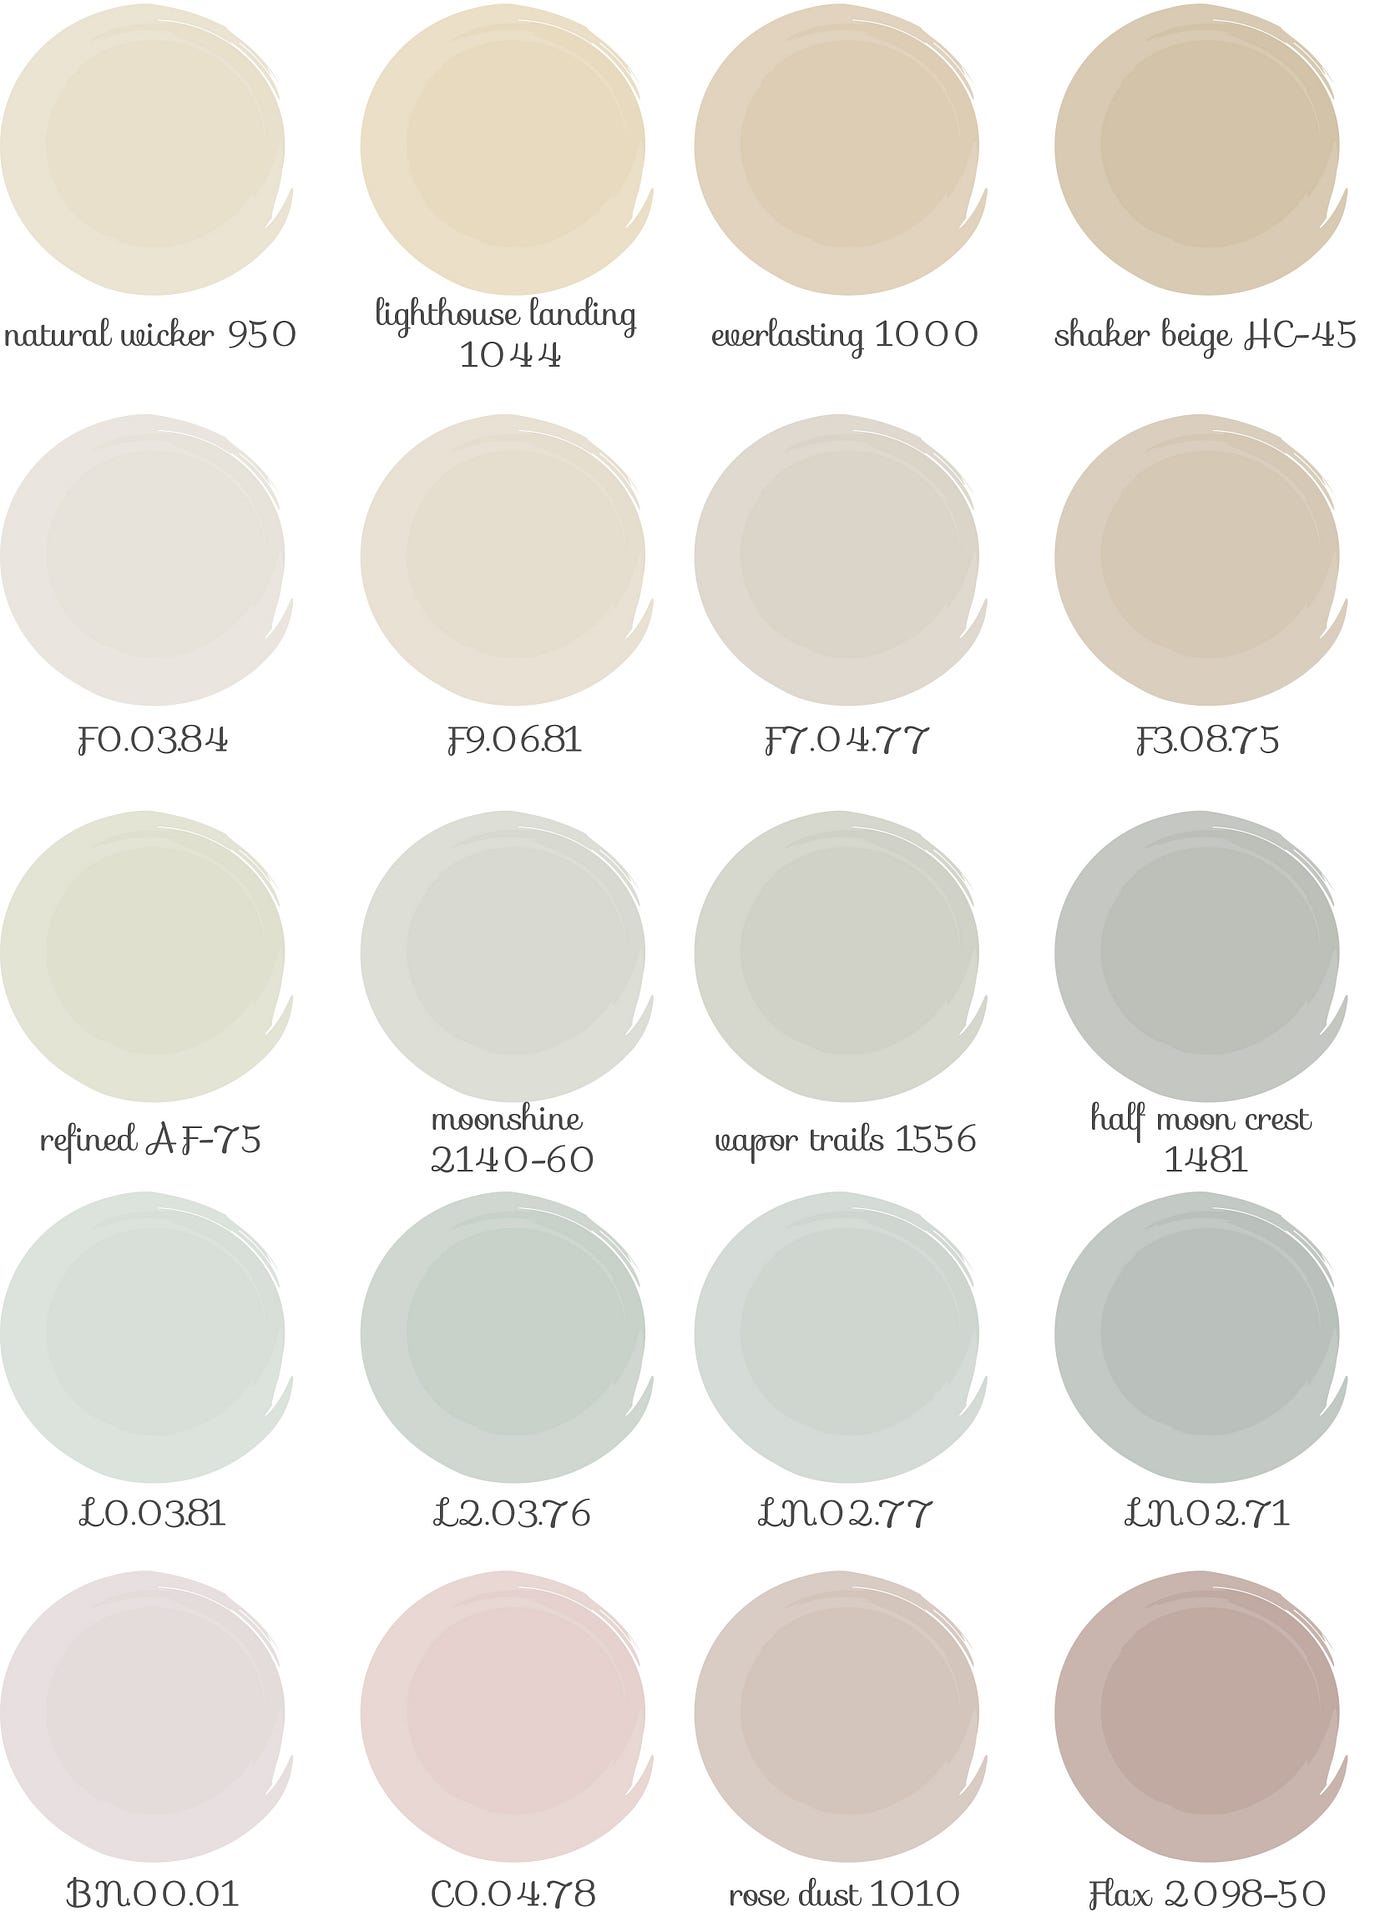 Top 20 neutral colors for your home (trust me, they are not all identical)  | by Valentina Di Roma | Medium